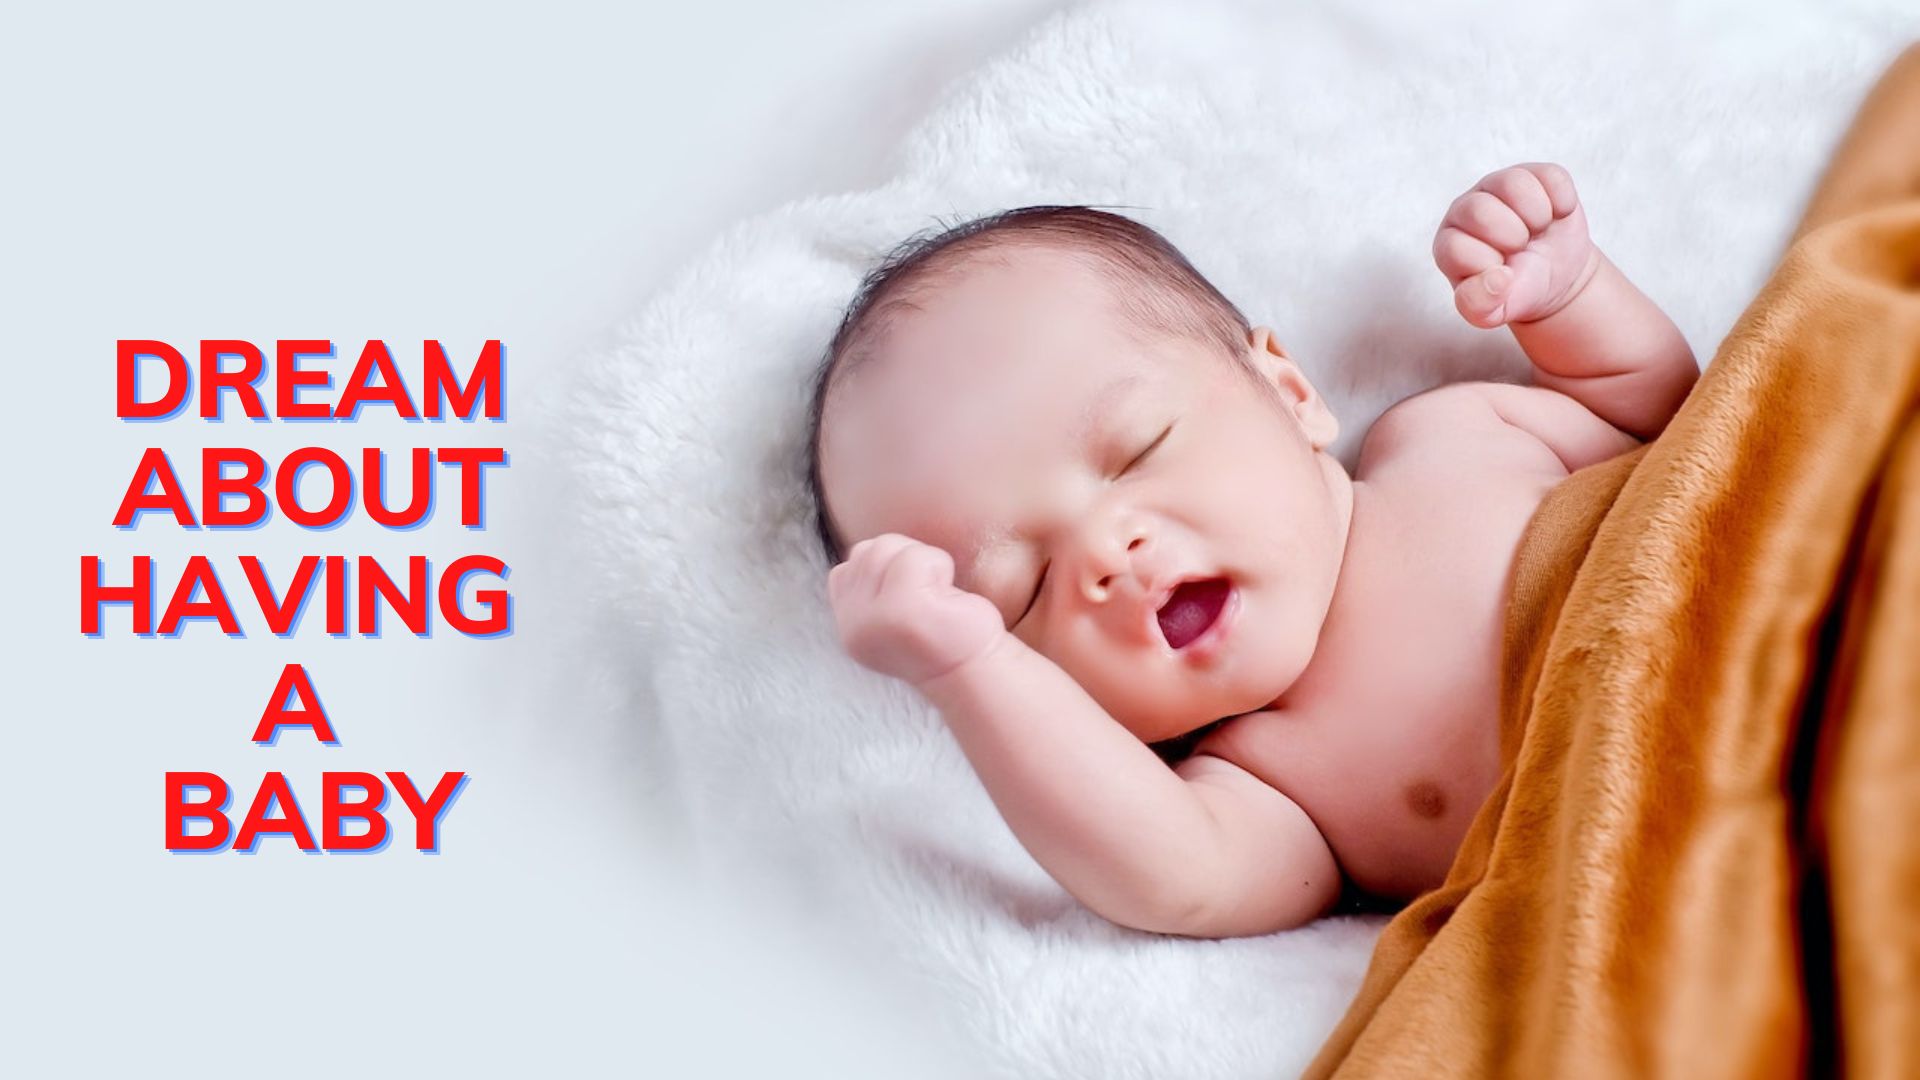 Dream About Having A Baby - A Sign Of Growth Or Development